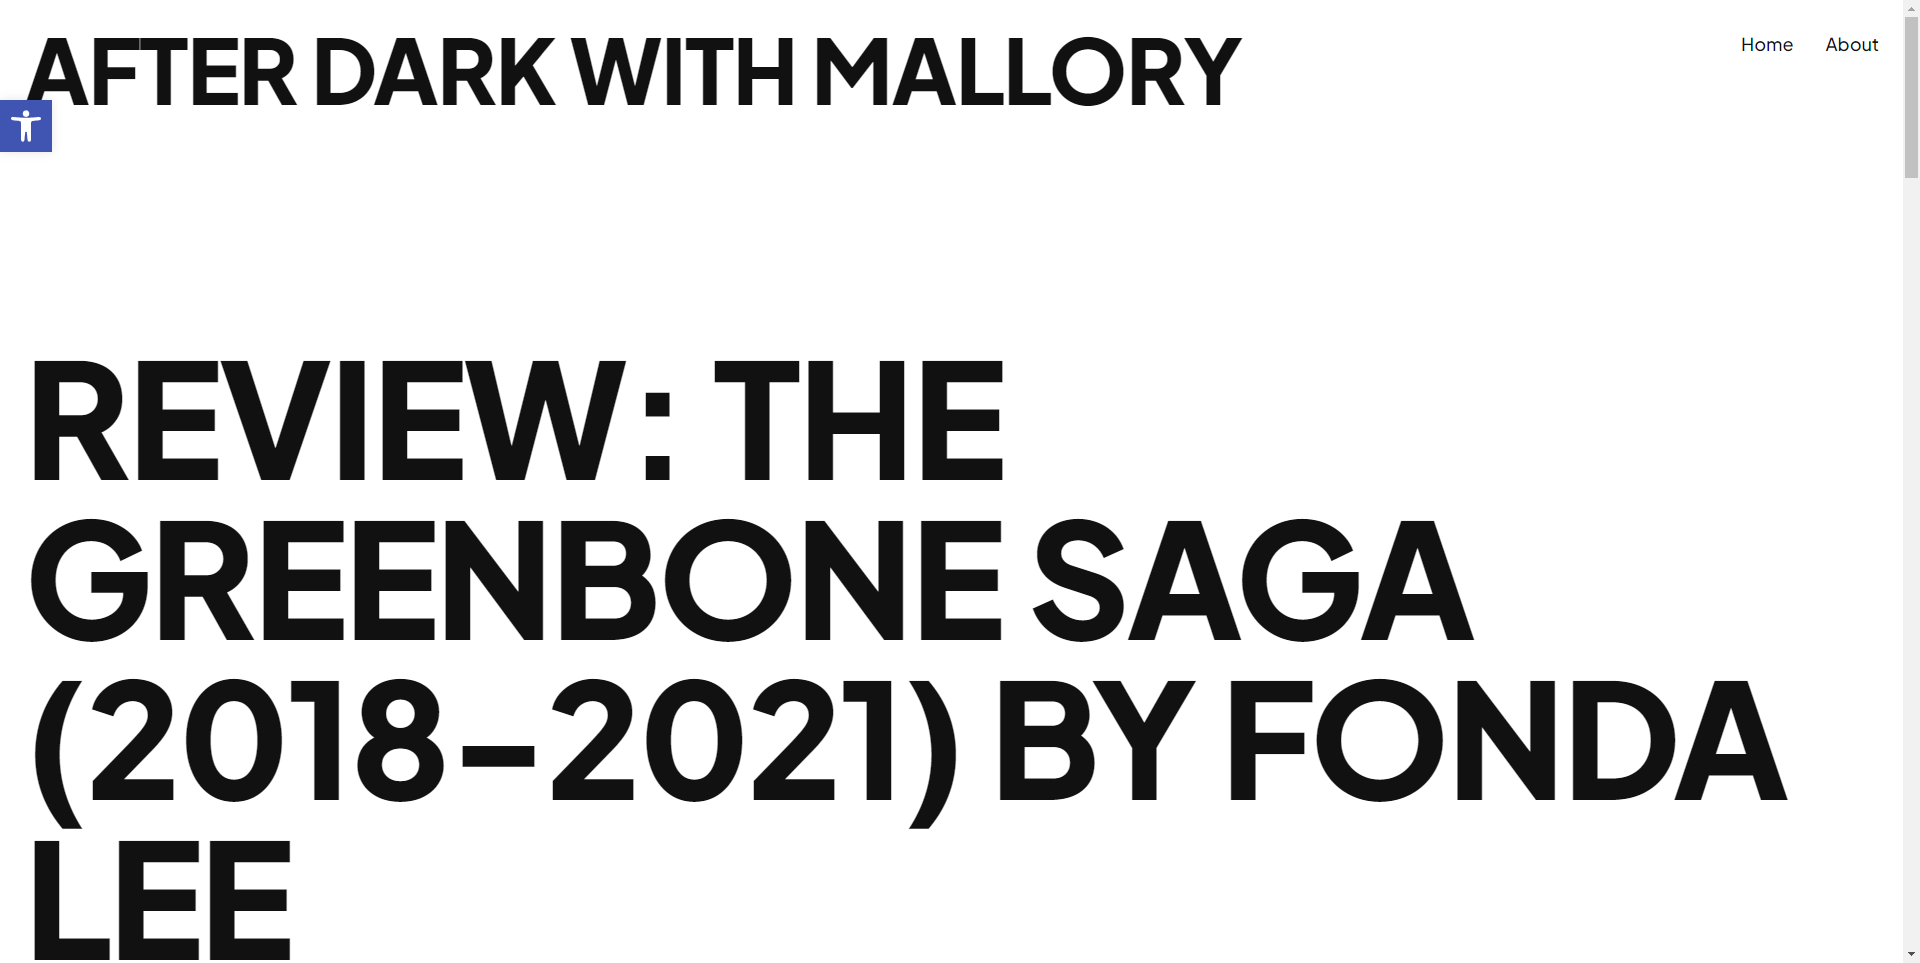 A screenshot of the a page containing a book review from my peer's website - After Dark With Mallory. It's a white background with large bold black text. The text reads "Review: The Greenbone Saga (2018-2021) By Fonda Lee".